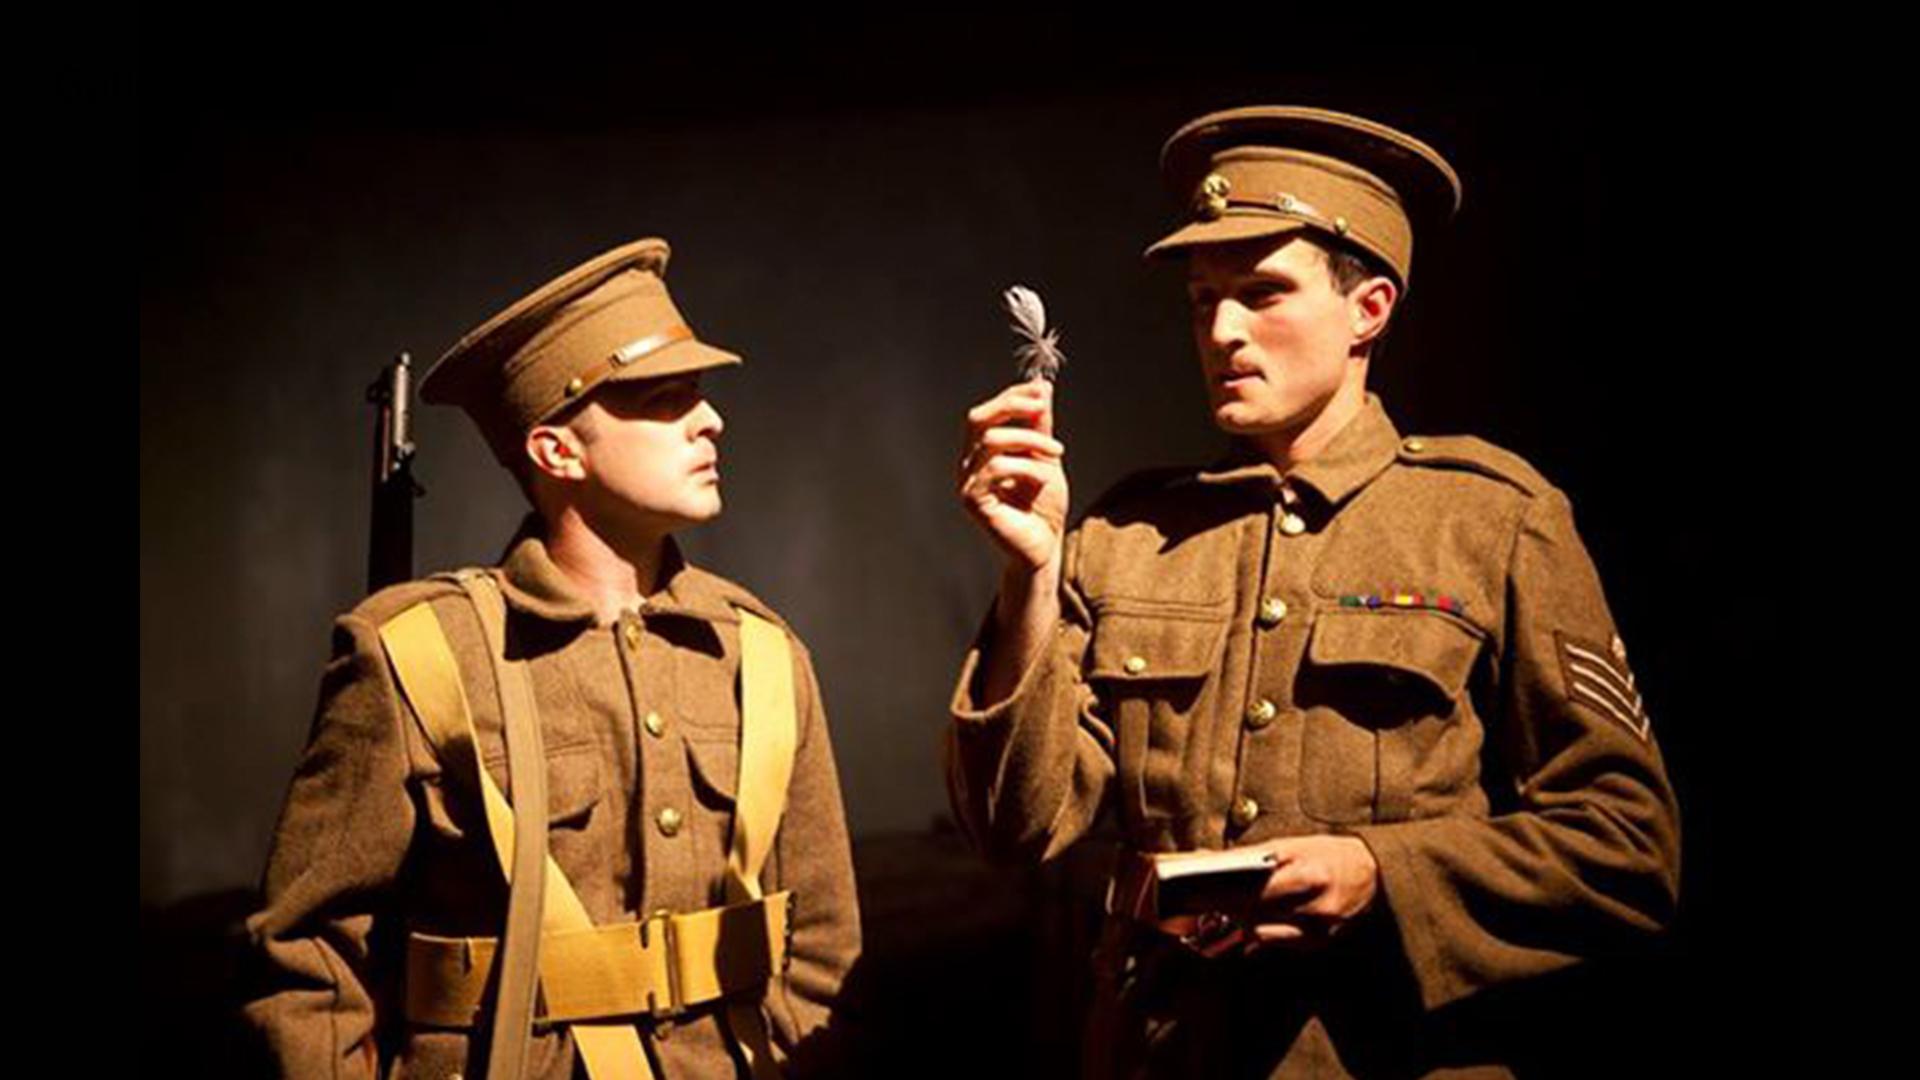 Two World War 1 British soldiers, one holding a white feather